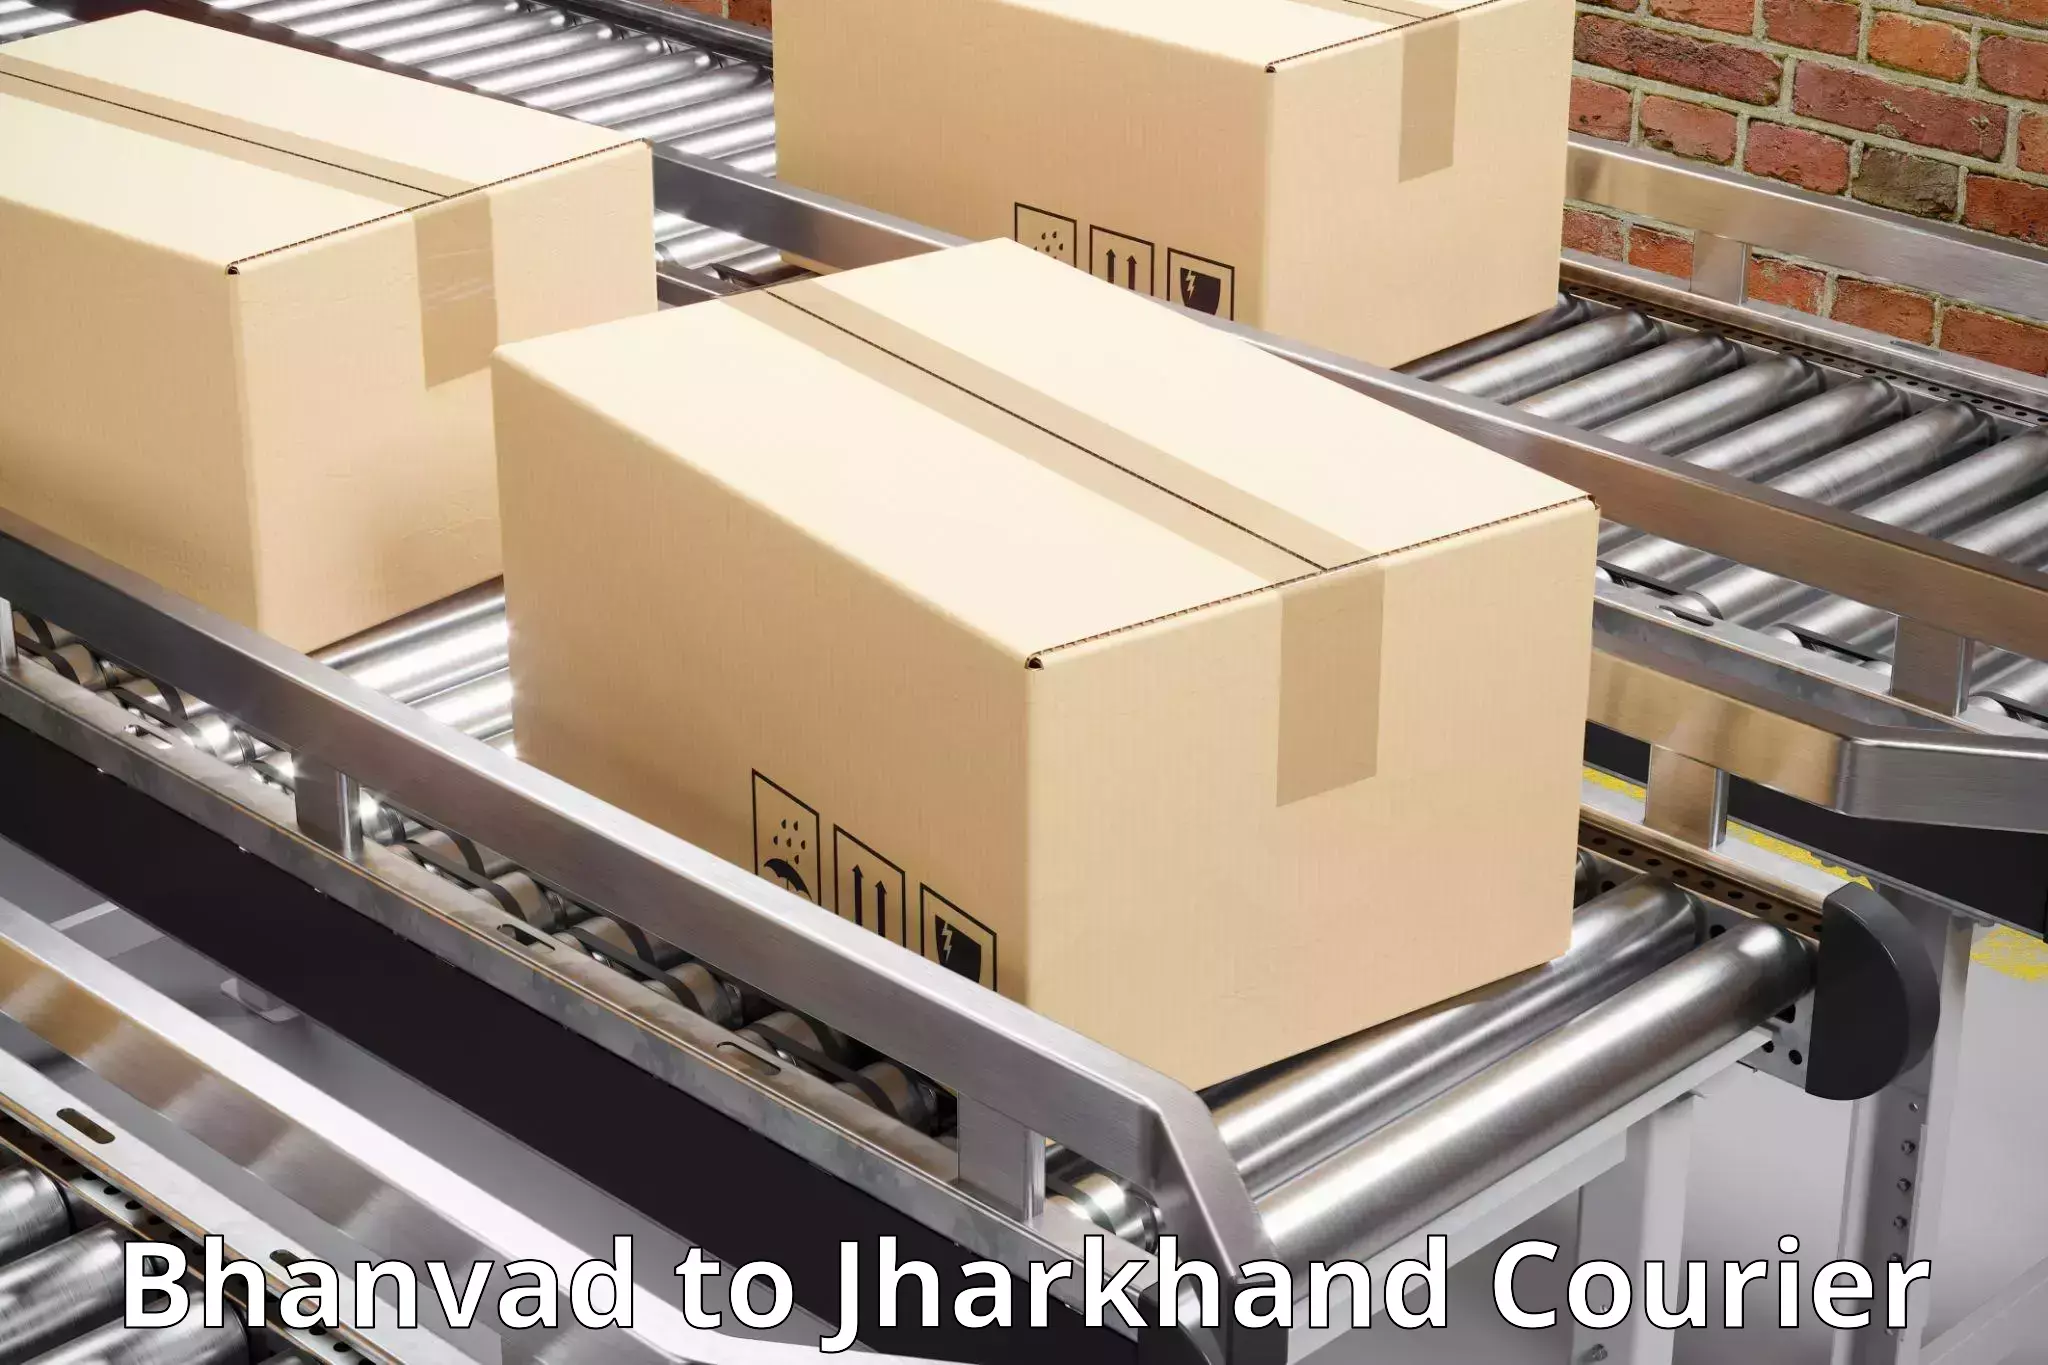 Automated parcel services Bhanvad to IIT Dhanbad